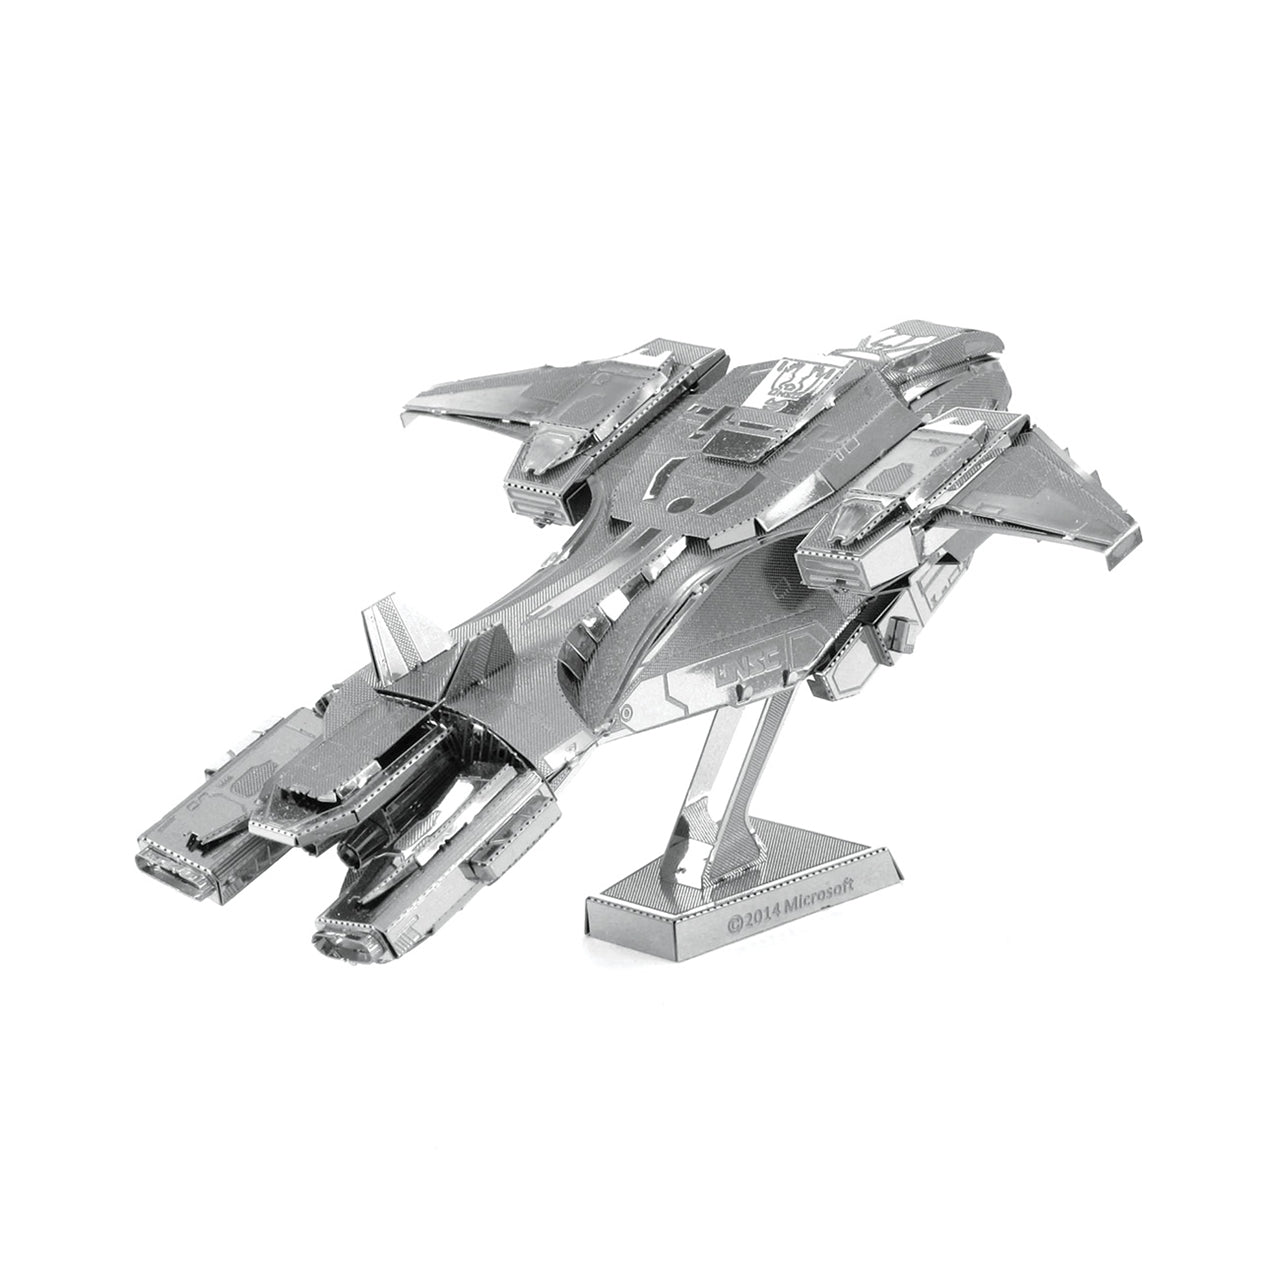 FMW292 UNSC Pelican (Buildable) 